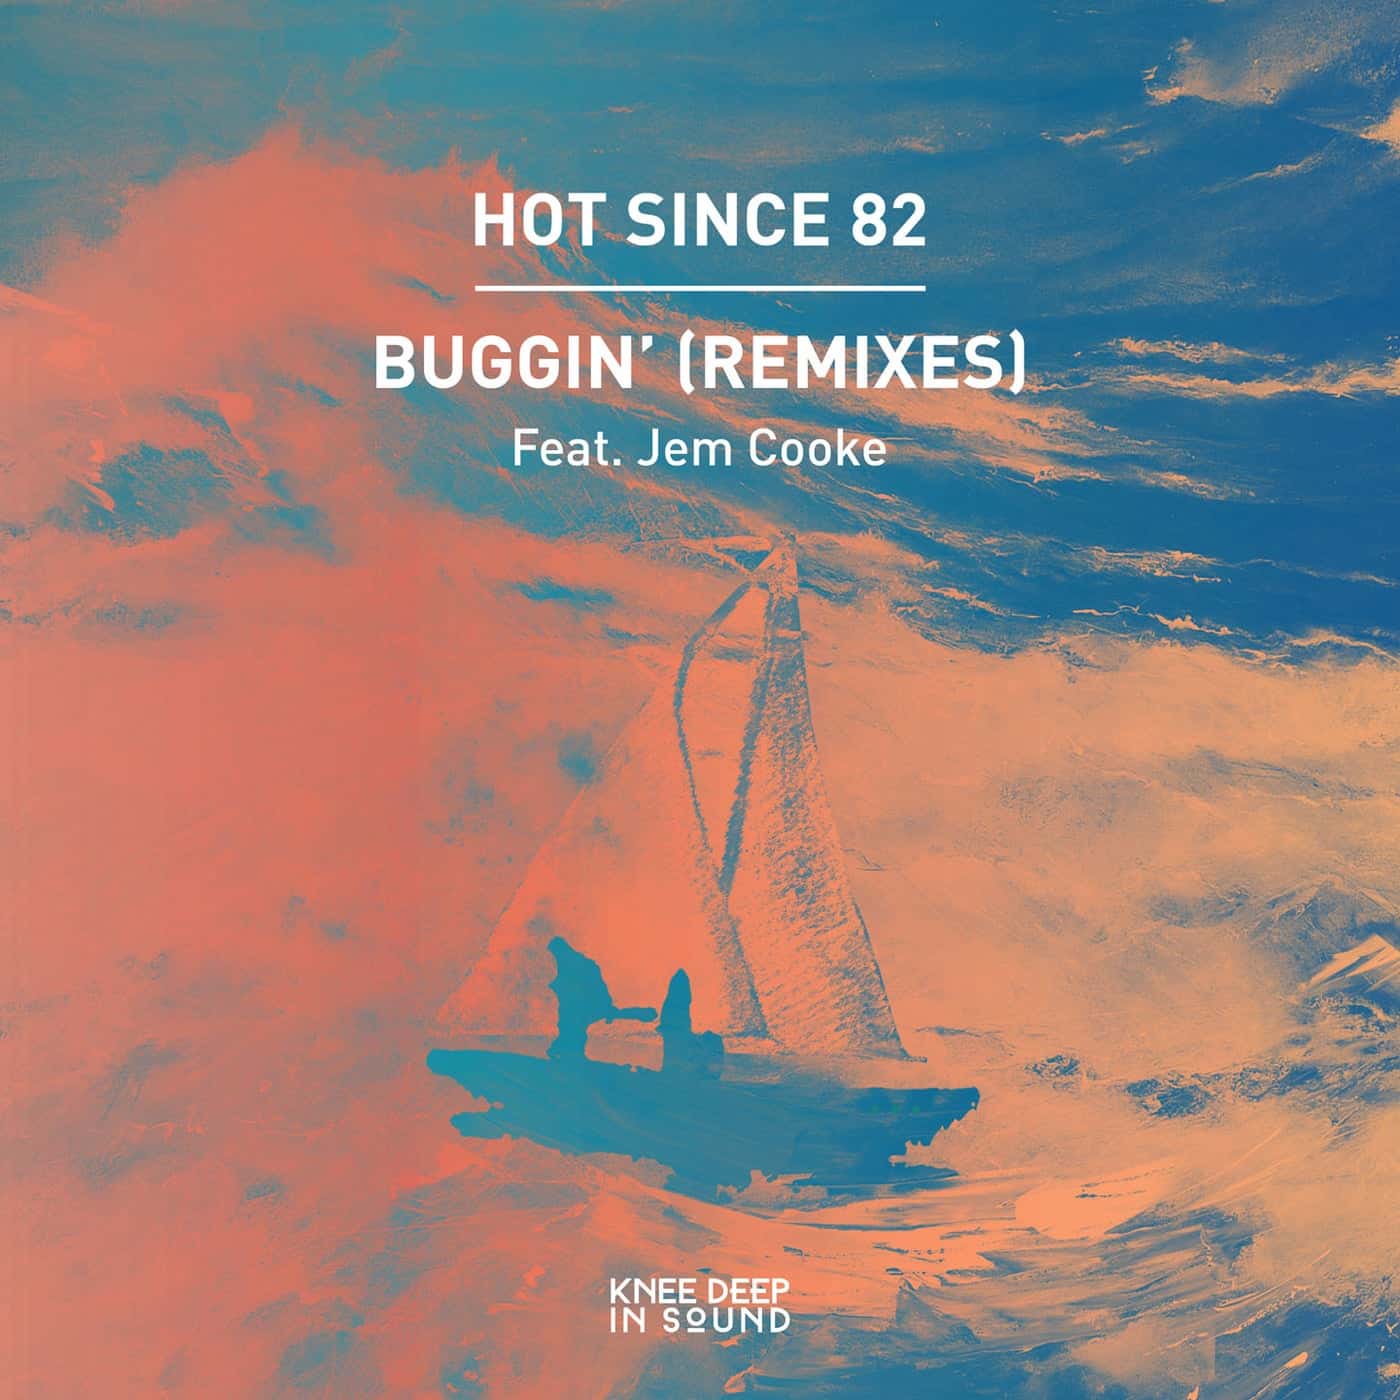 image cover: Hot Since 82, Jem Cooke - Buggin' (Remixes) / KD147